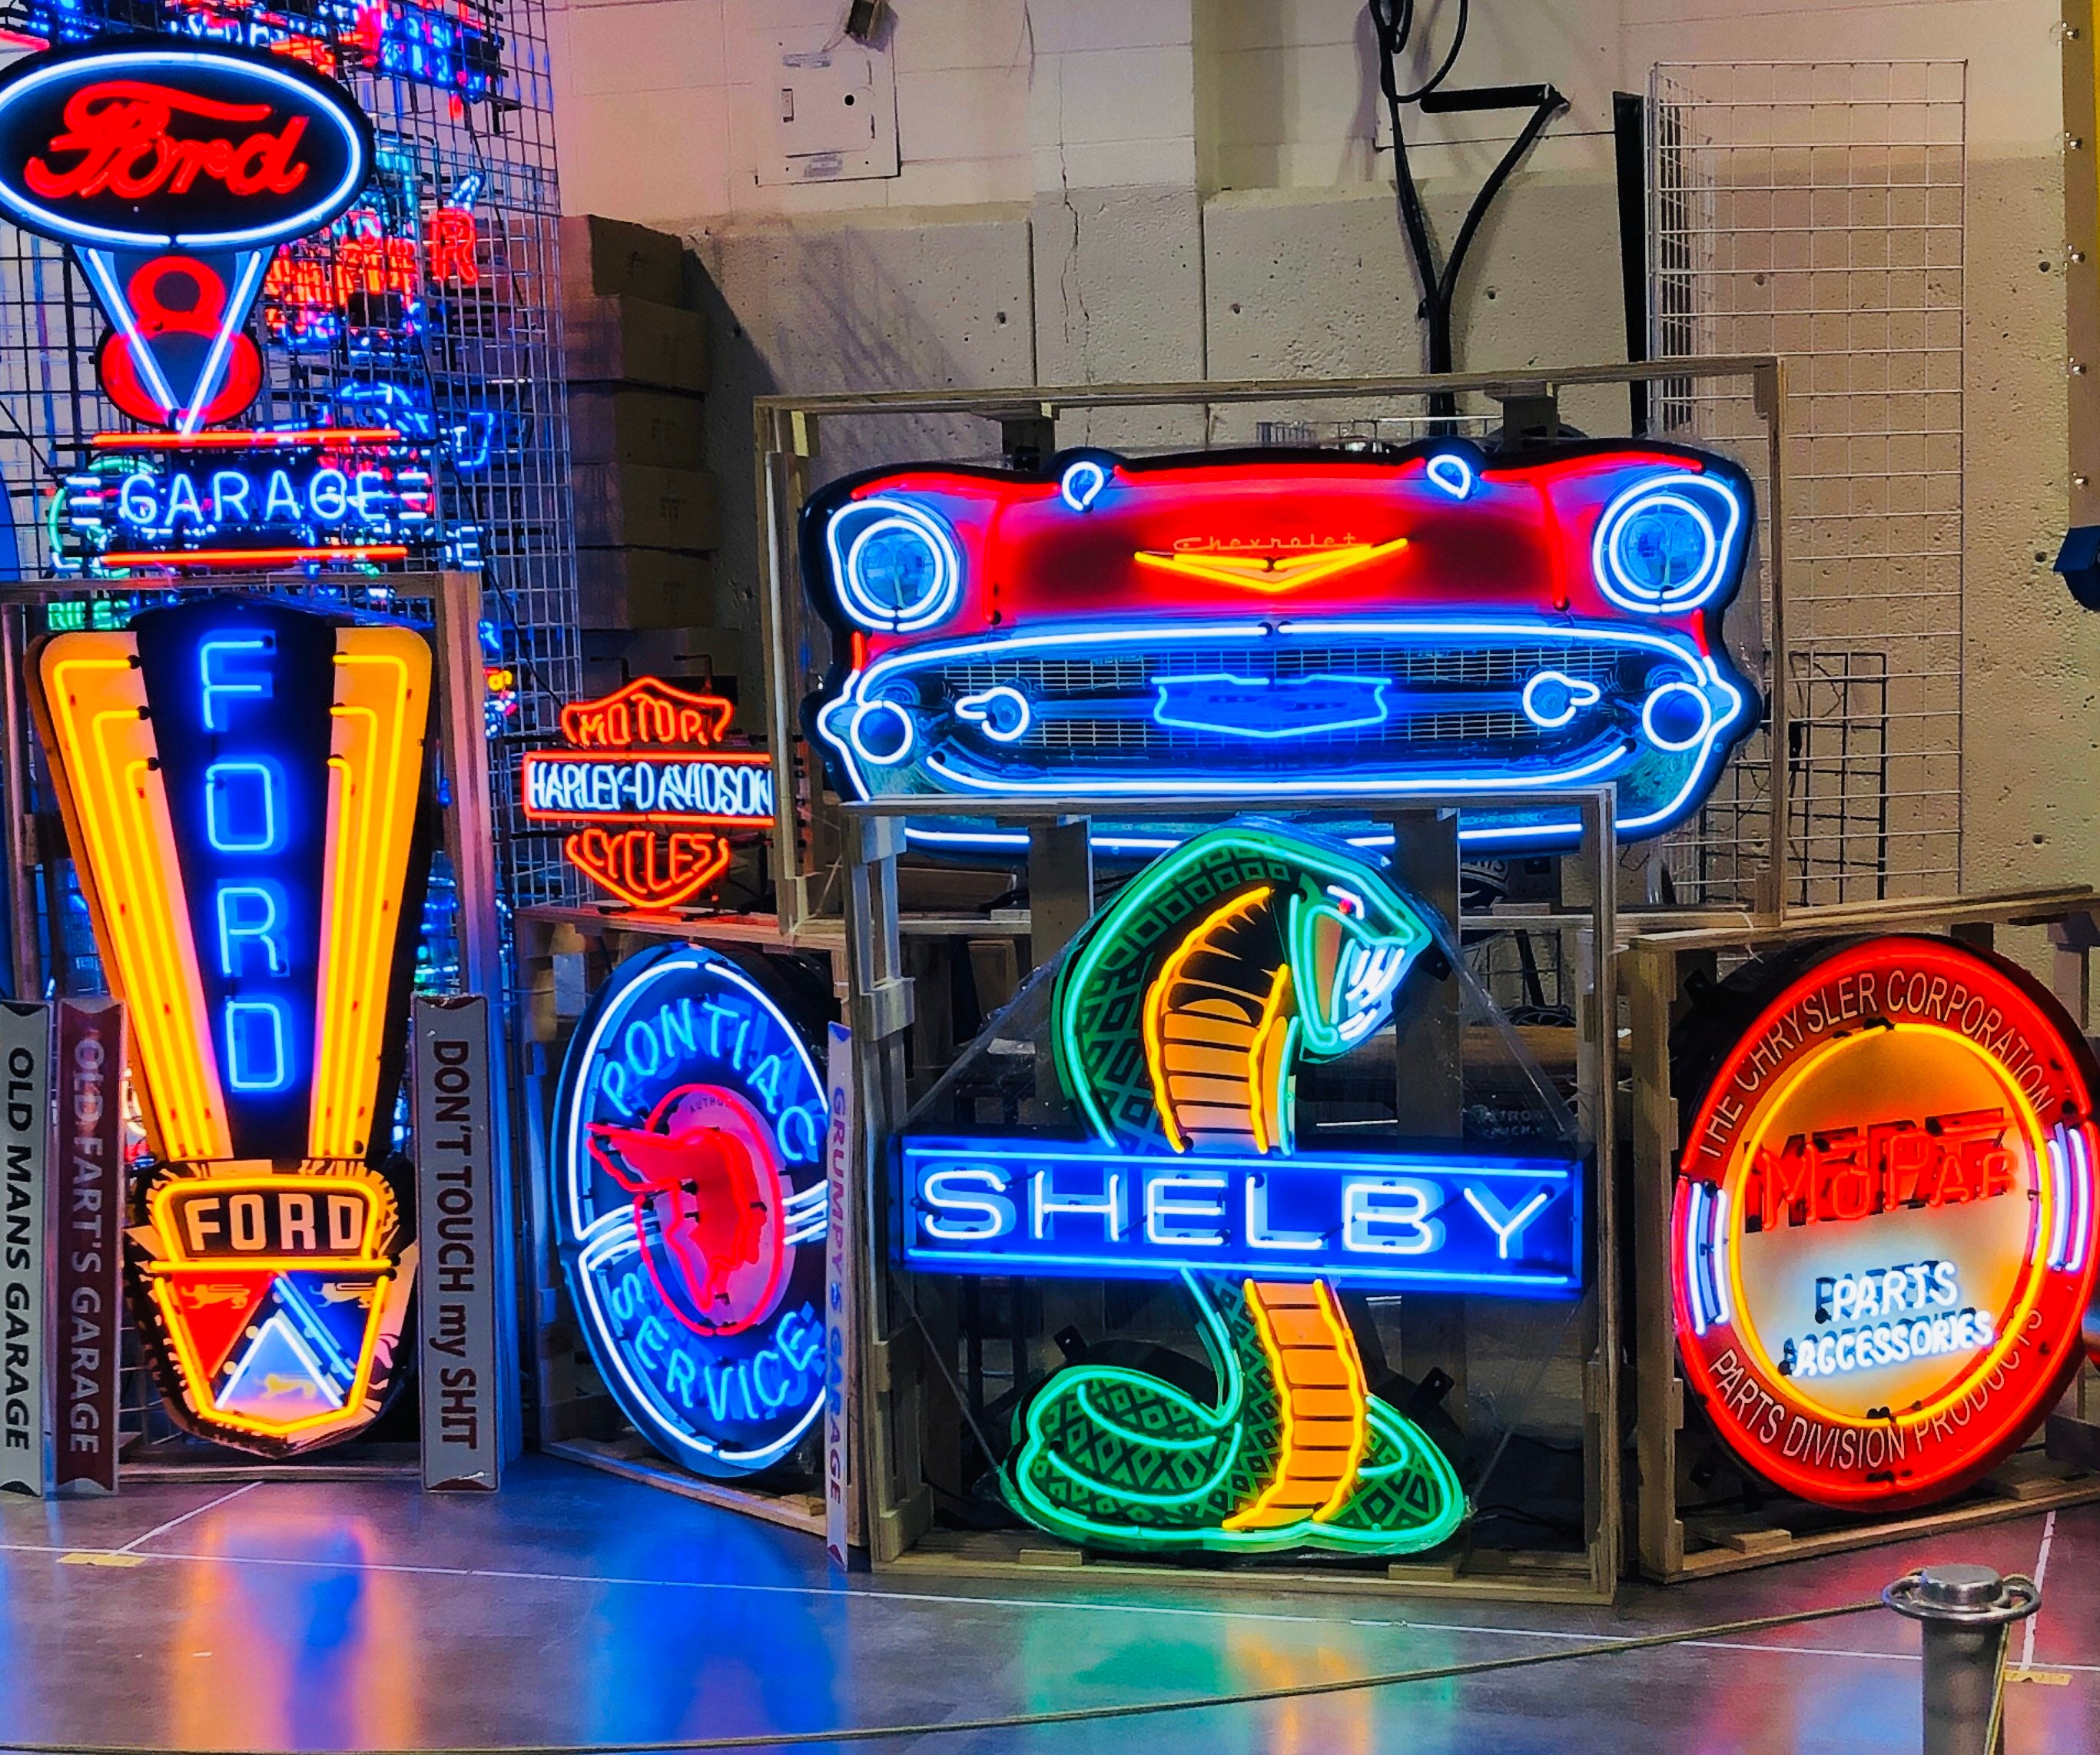 Rare SHELBY MUSTANG COBRA FORD GT REAL GLASS NEON BEER BAR PUB LIGHT SIGN 17"X14 